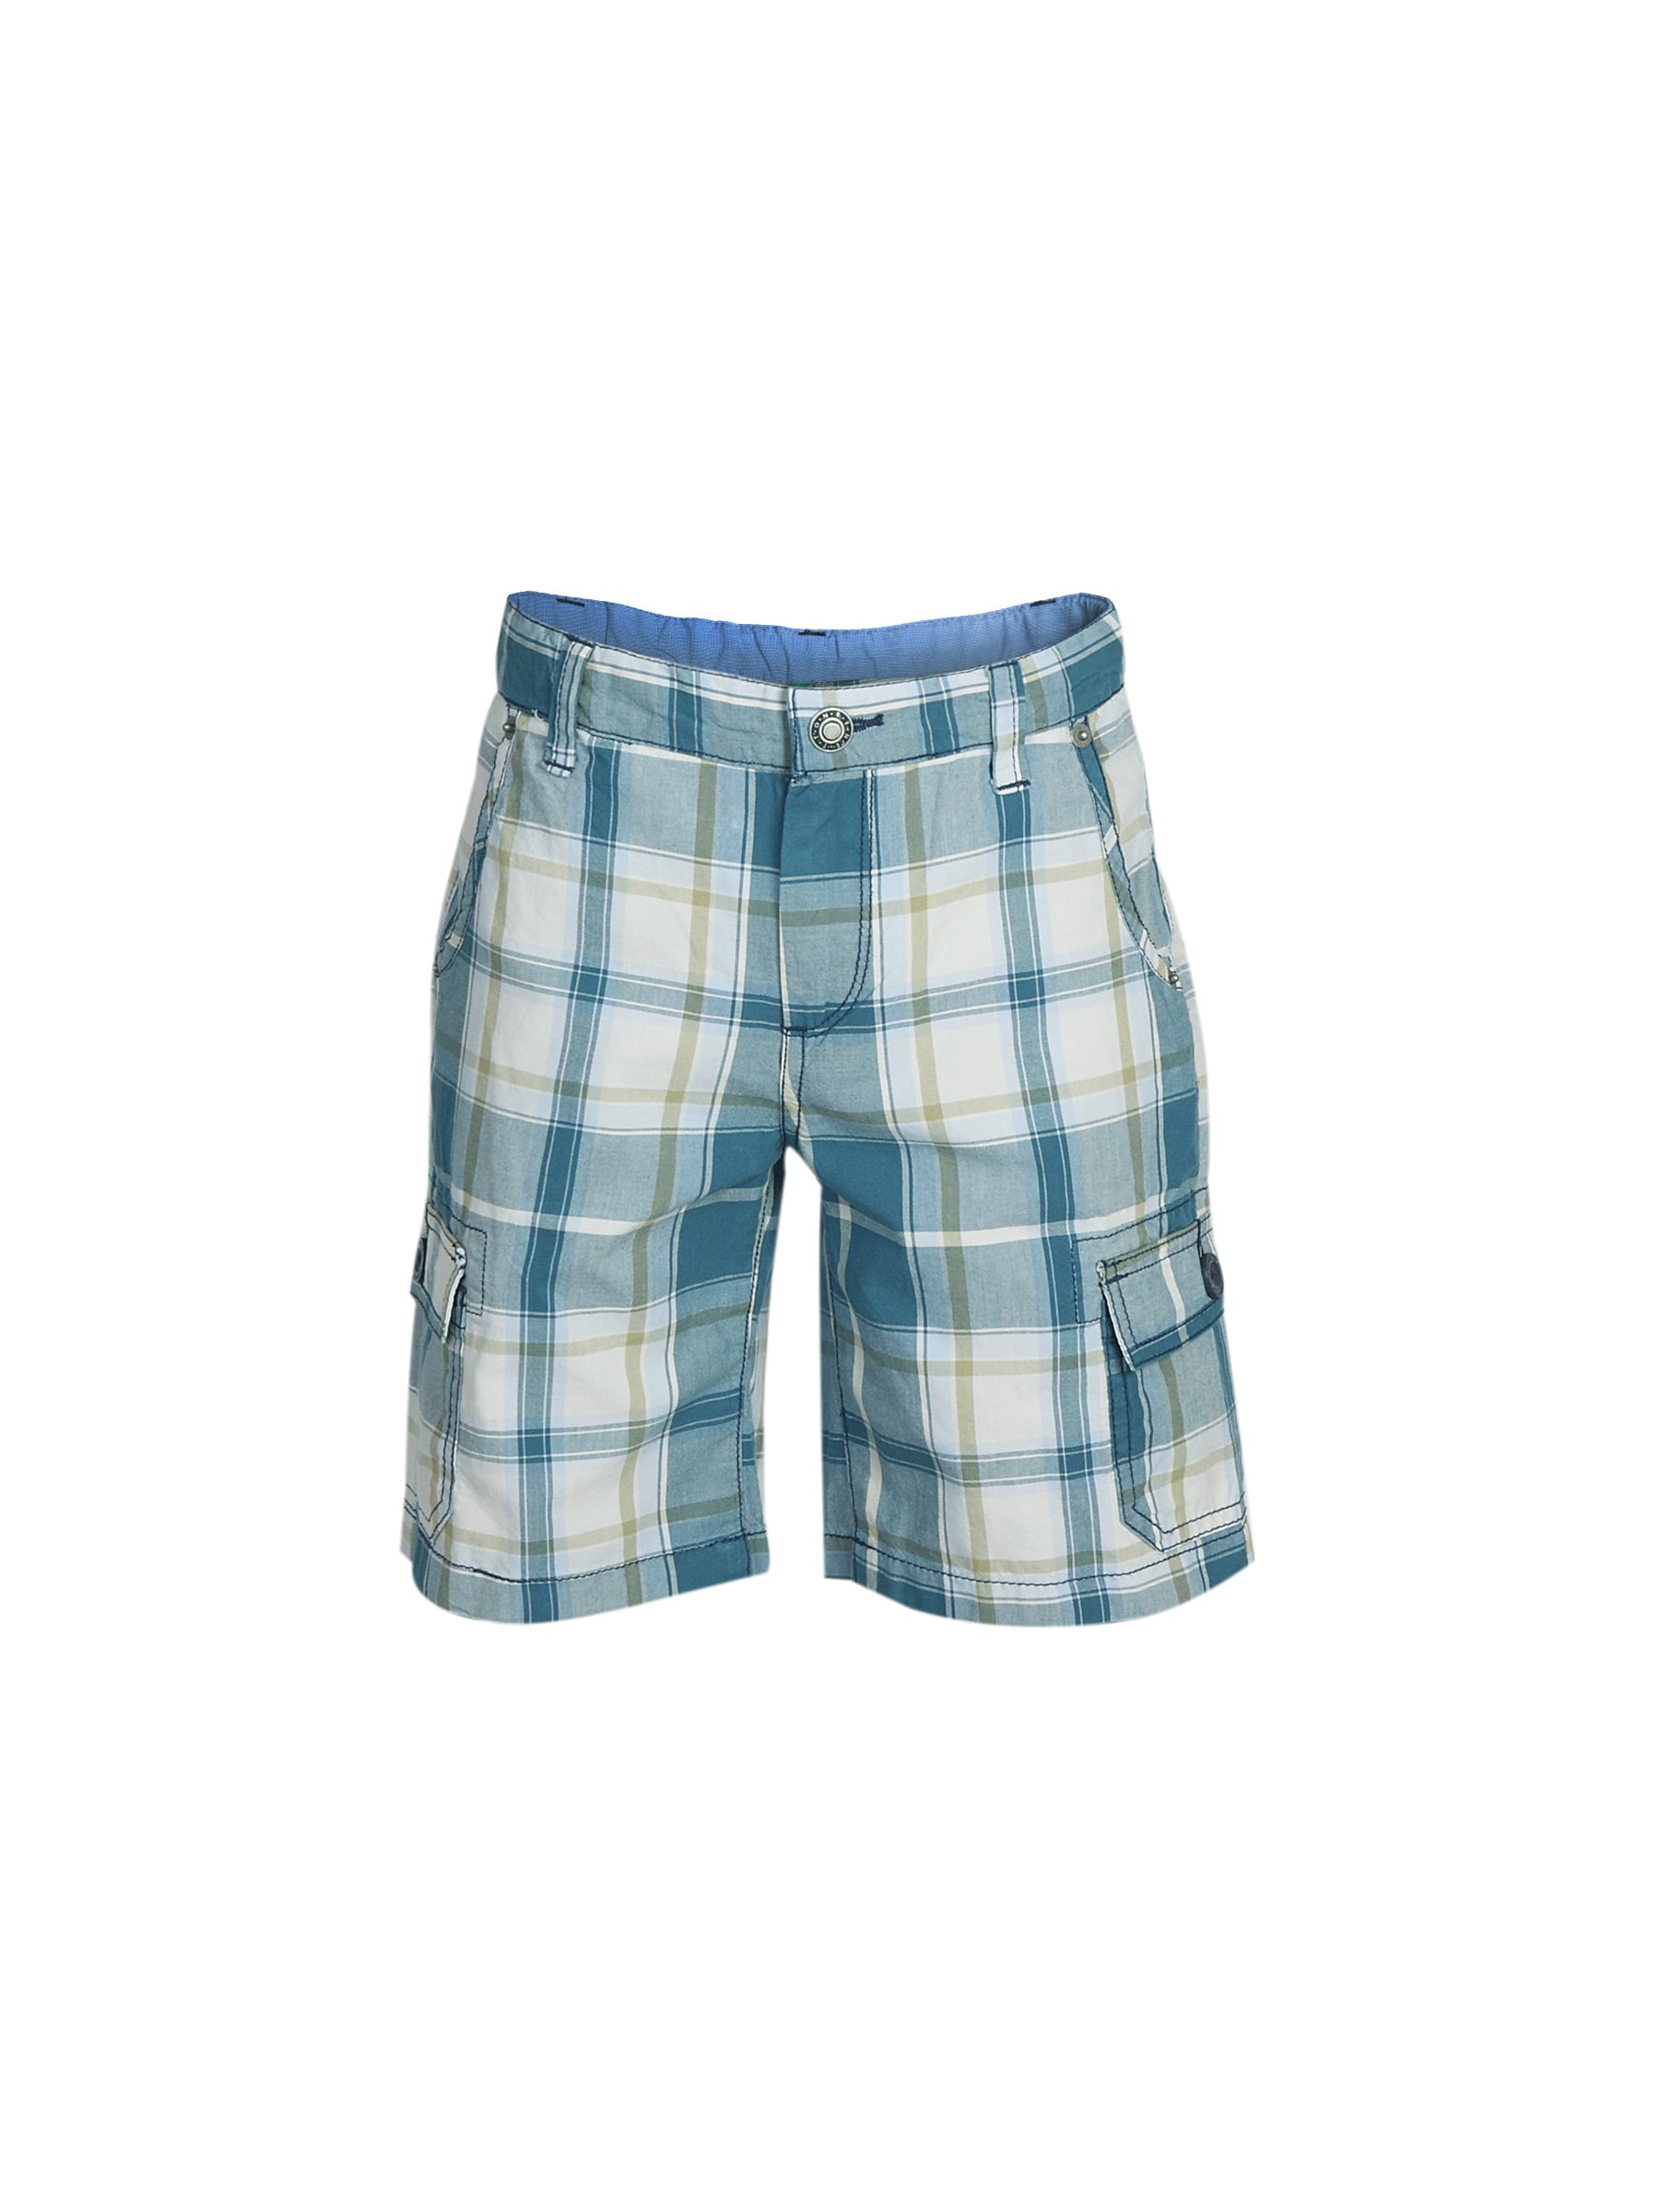 United Colors of Benetton Boys Check Blue Shorts